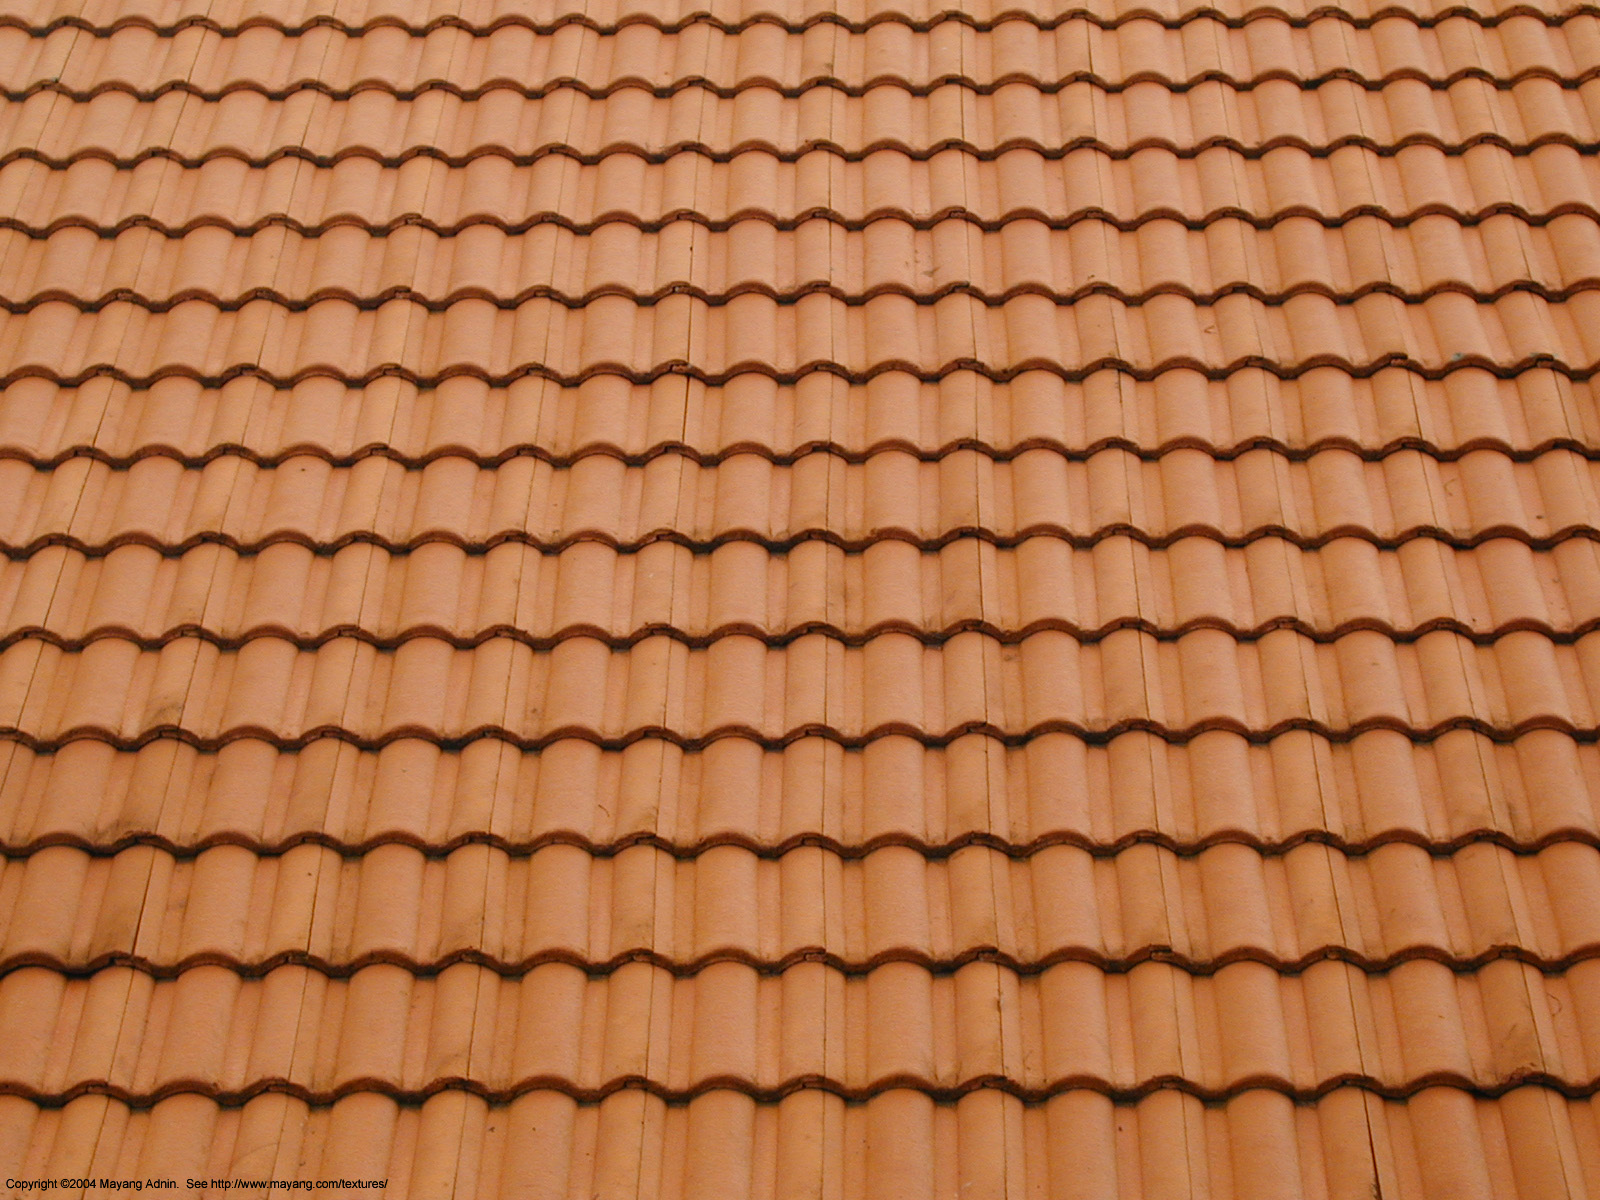 Roof Pics, Man Made Collection